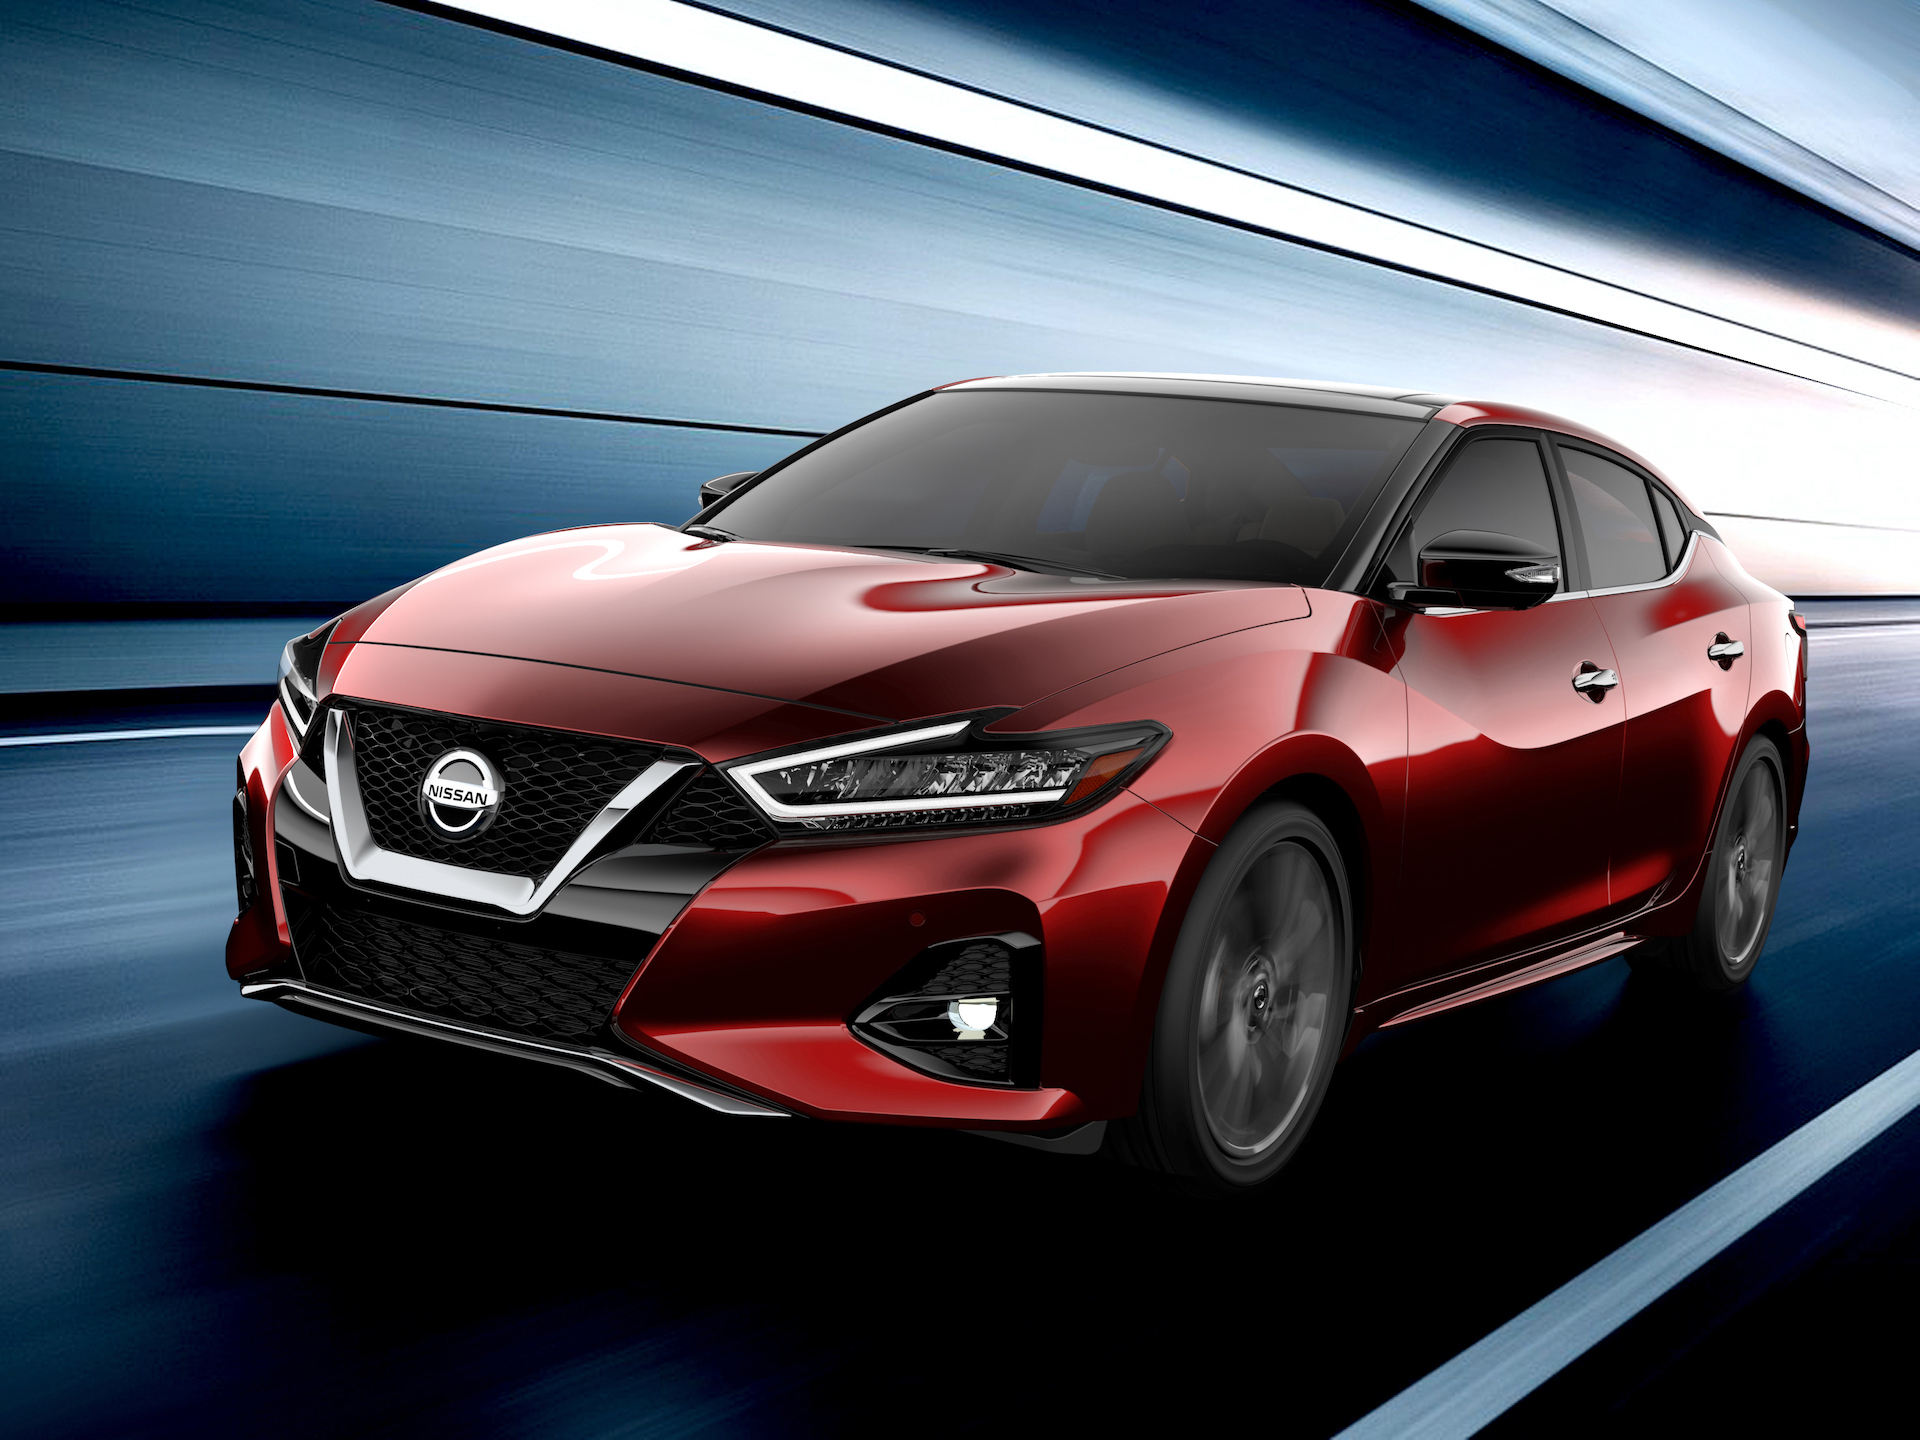 2019 Nissan Maxima revealed with minor niptuck